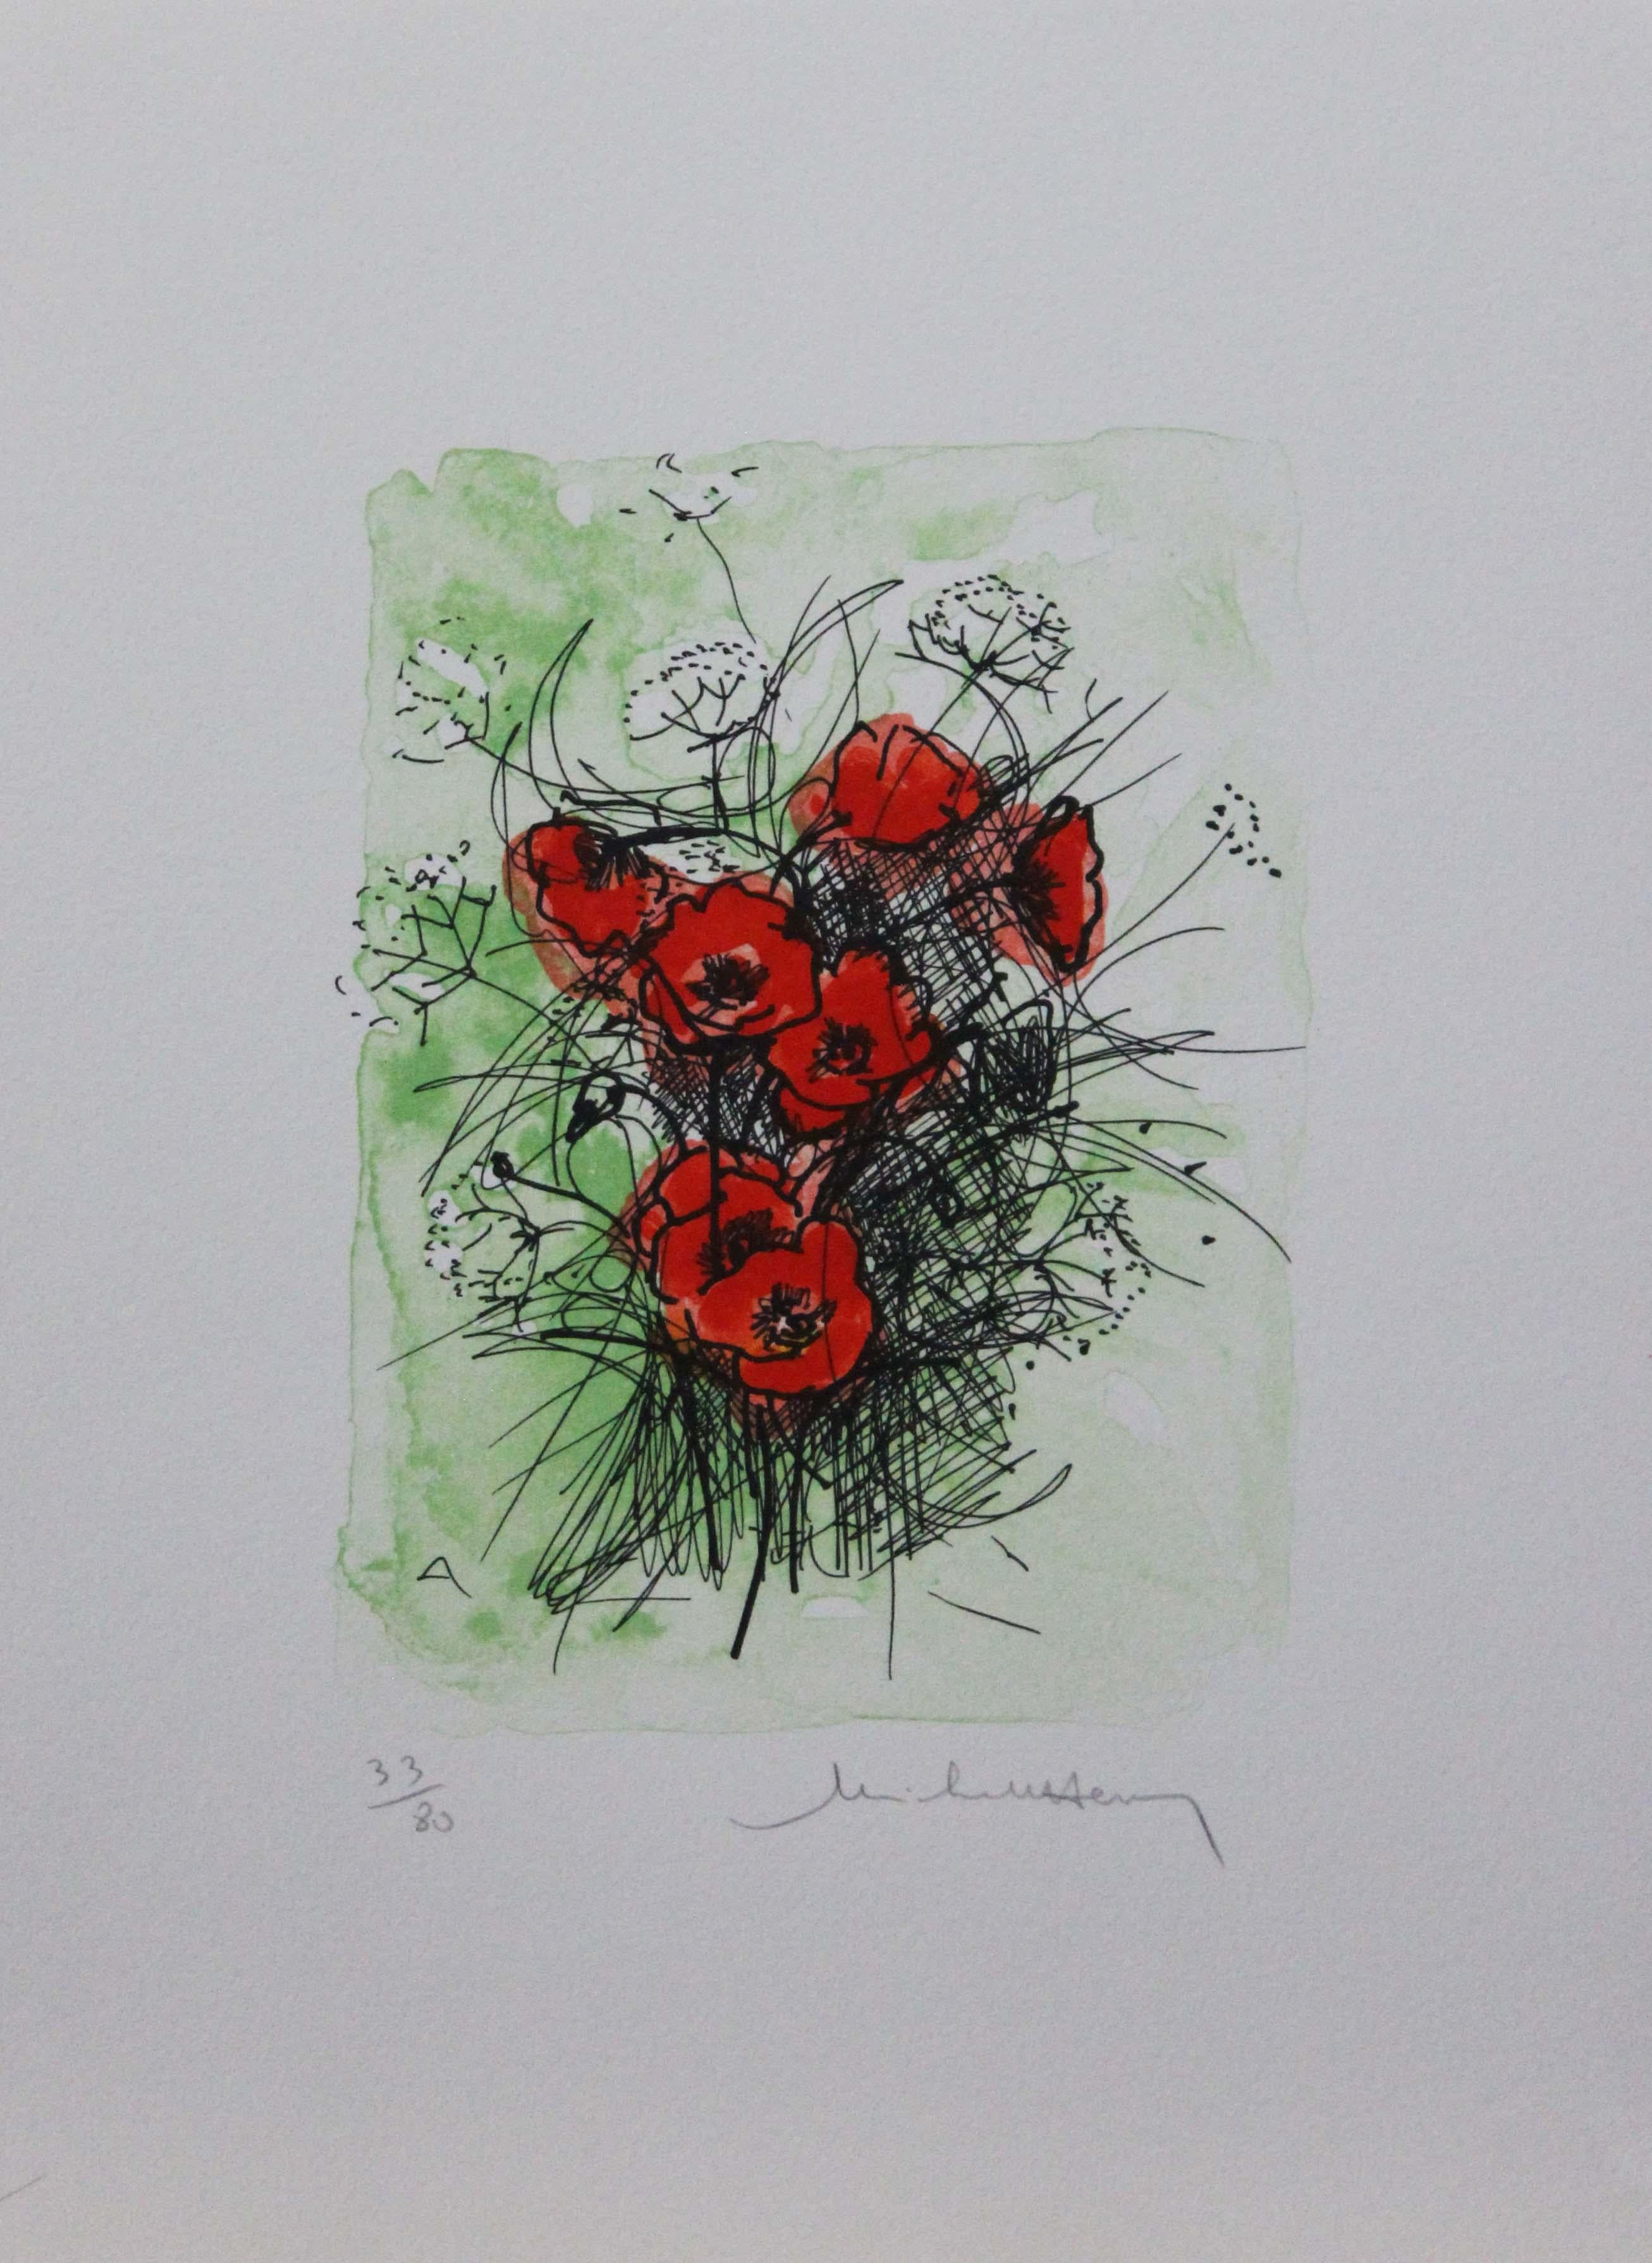 Unknown Still-Life Print - Les Fleurs #4-Limited Edition Print, Signed by Artist (Signature is Illegible) 